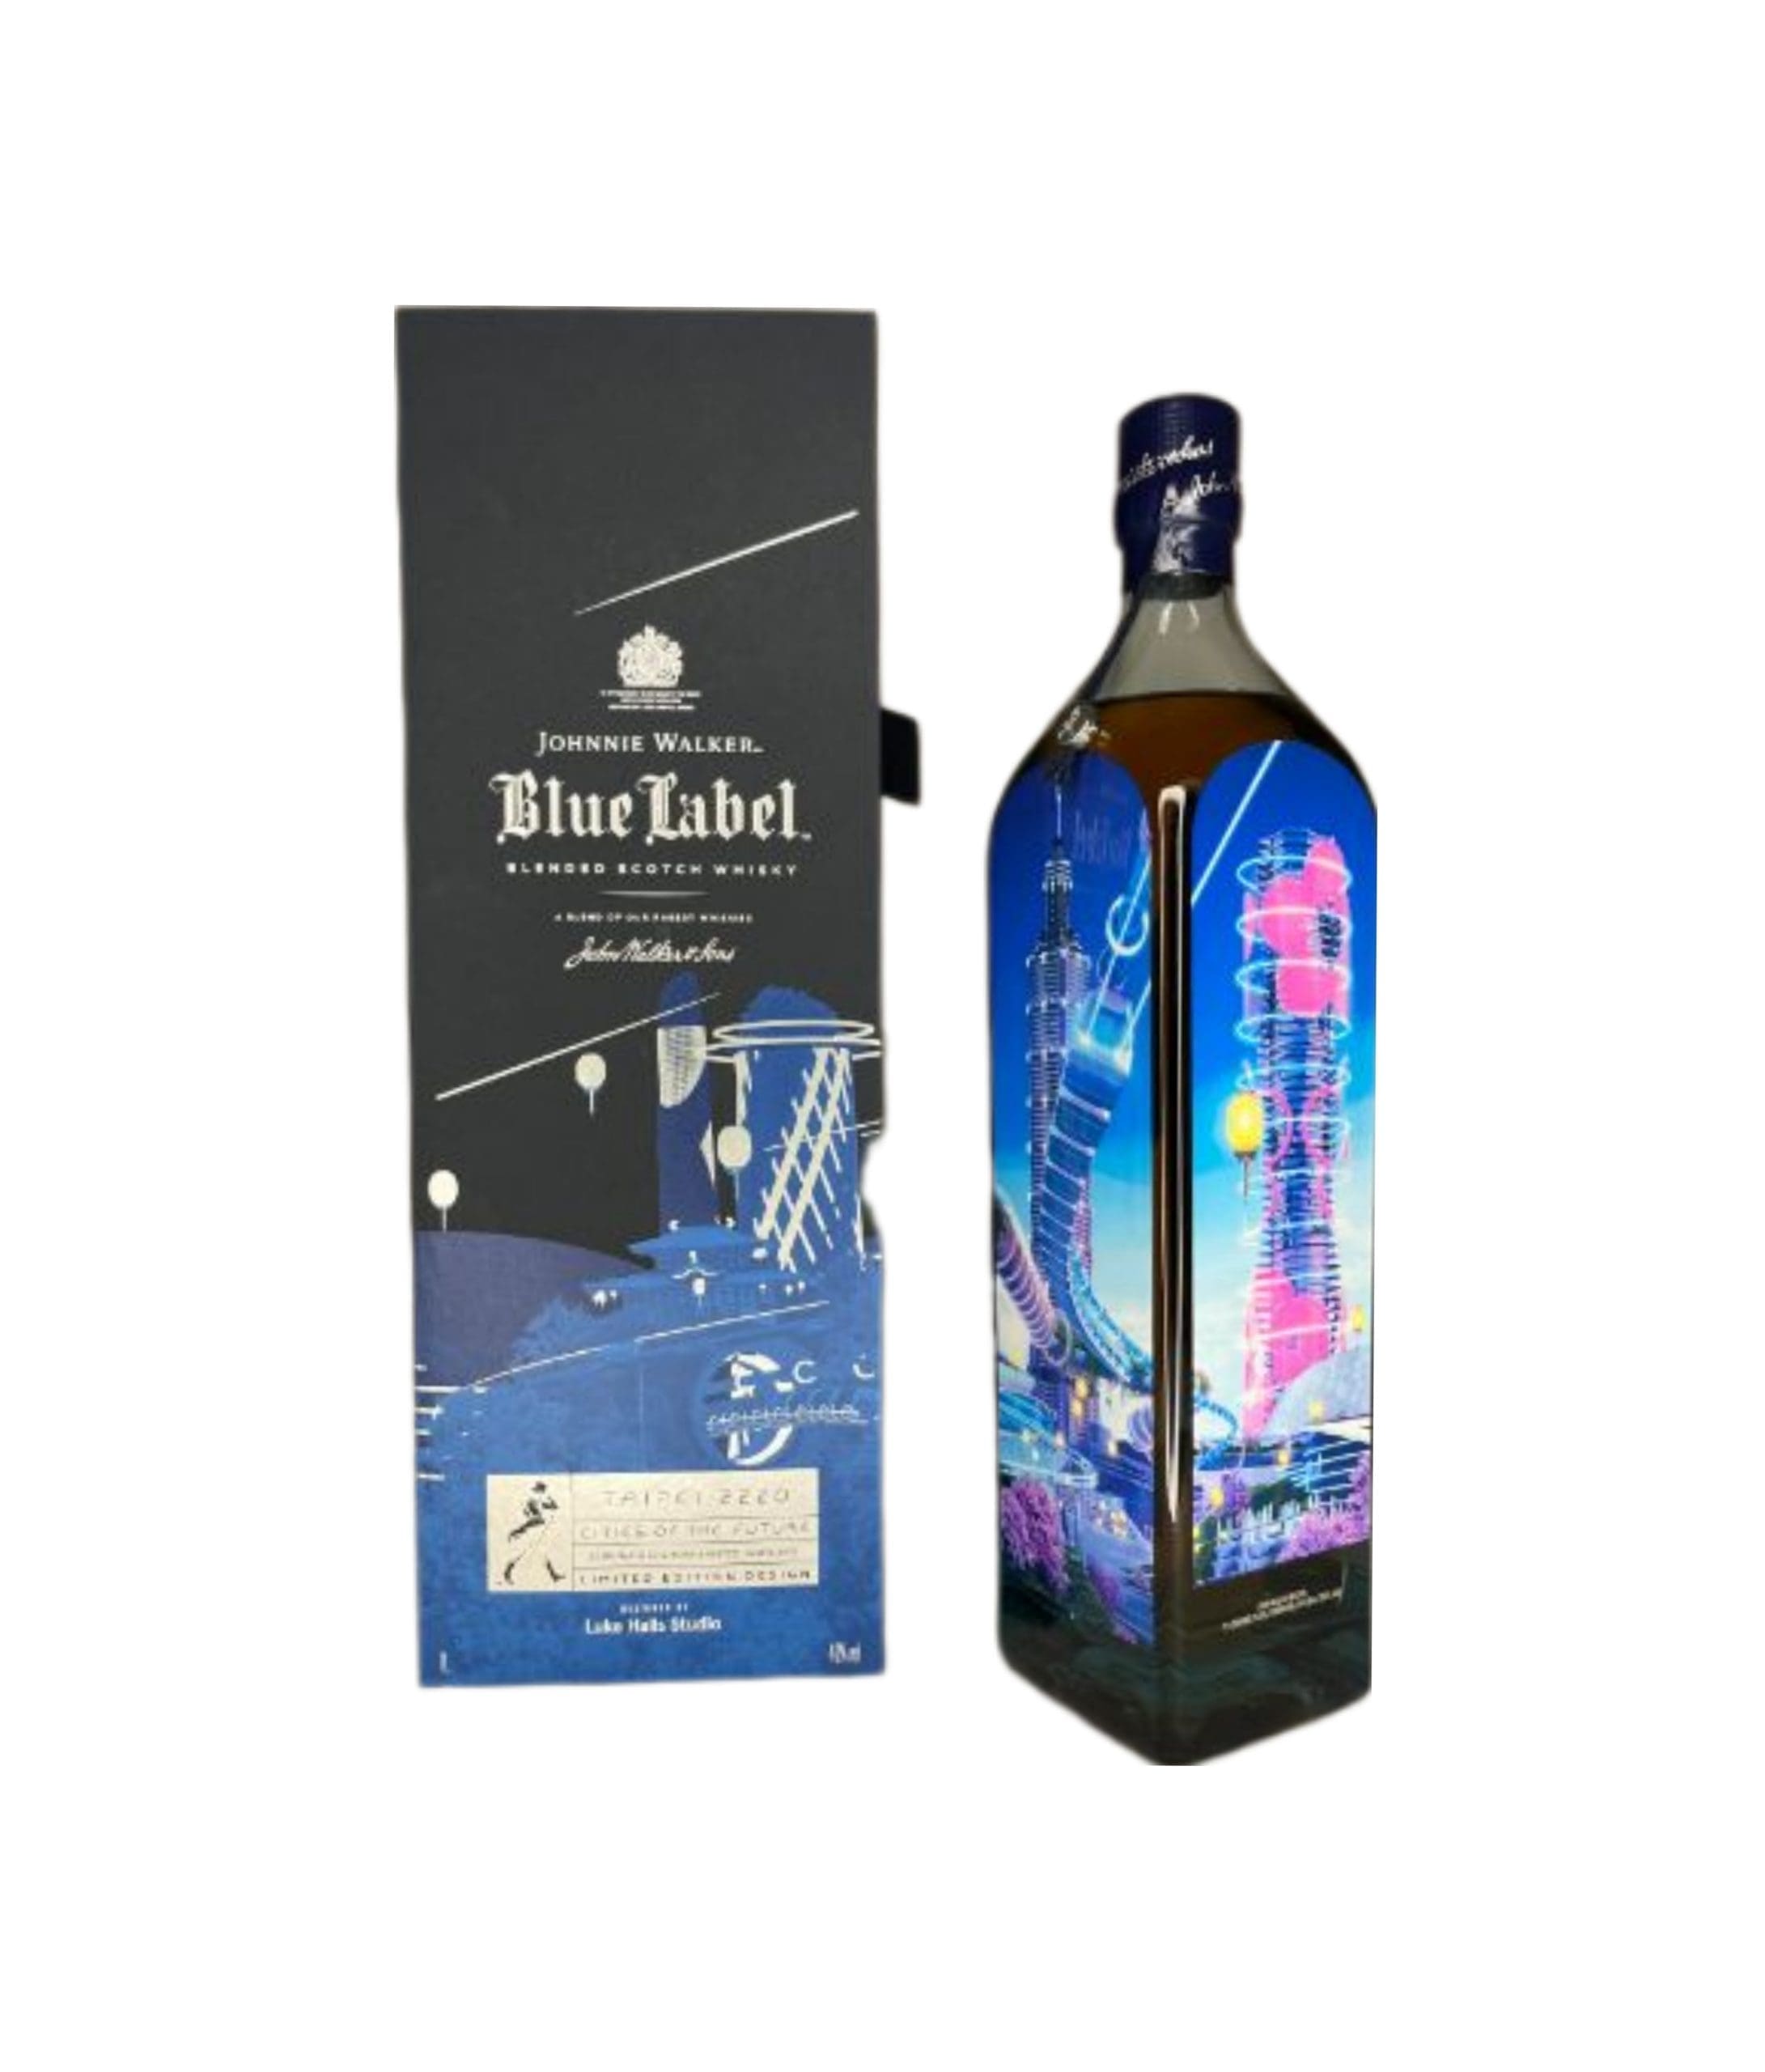 Johnnie Walker Blue Label Cities of the Future 2220 Blended Scotch